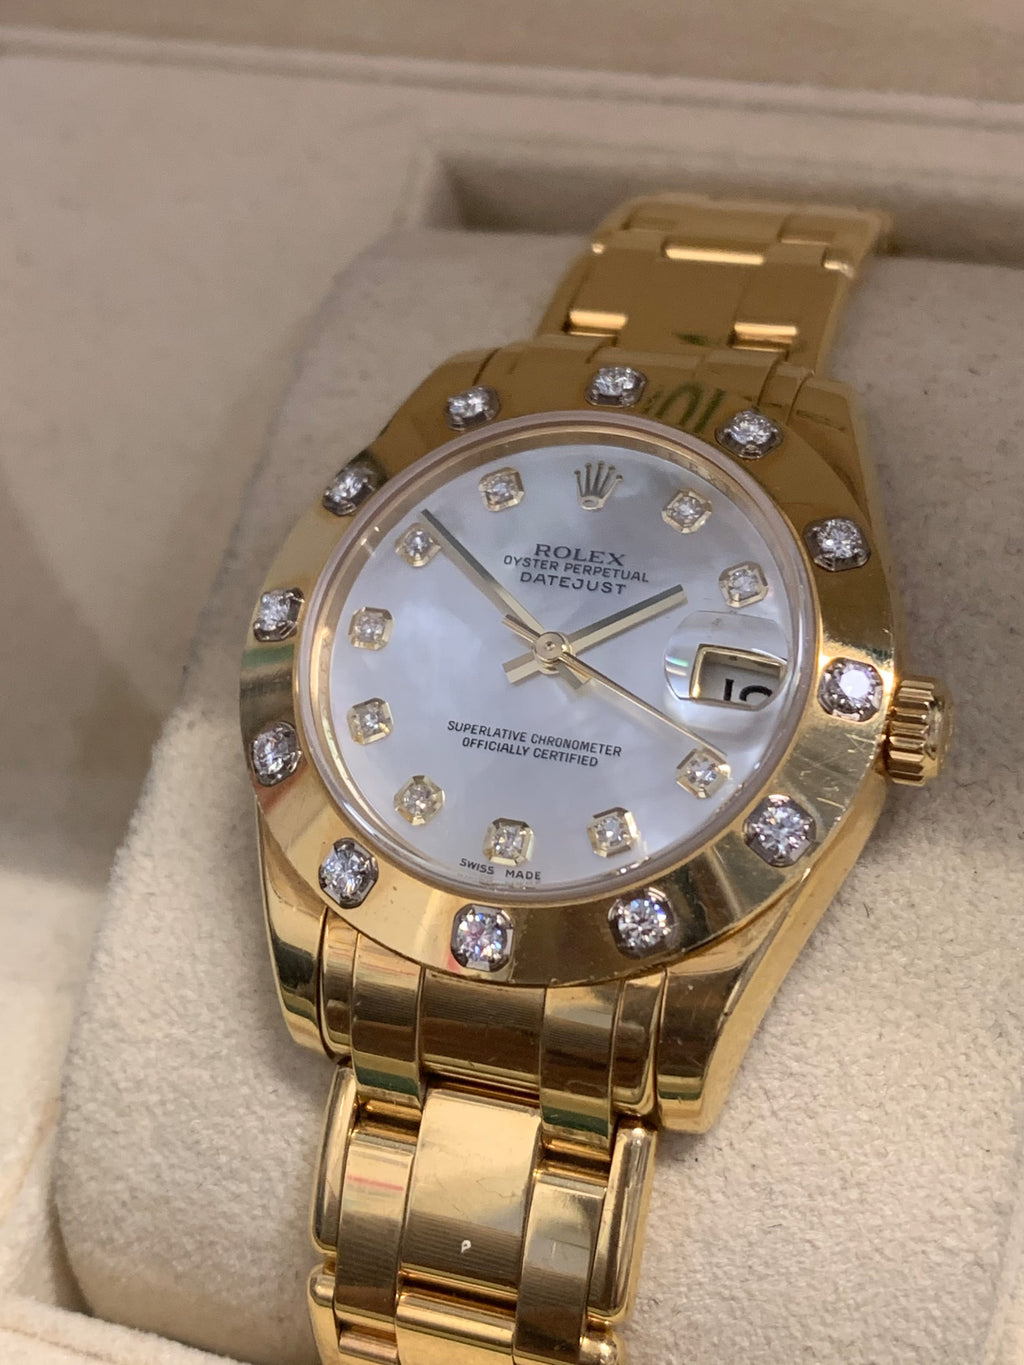 ROLEX Oyster Perpetual Datejust 18K Yellow Gold Watch